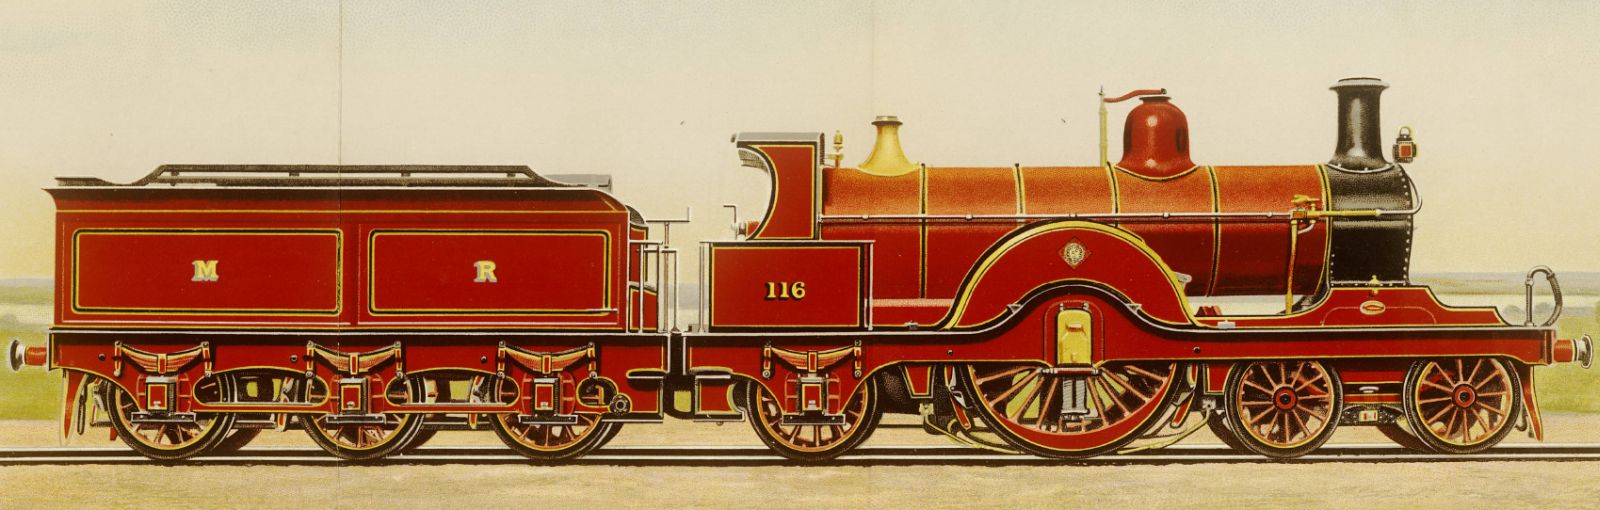 Colored side view of No. 116